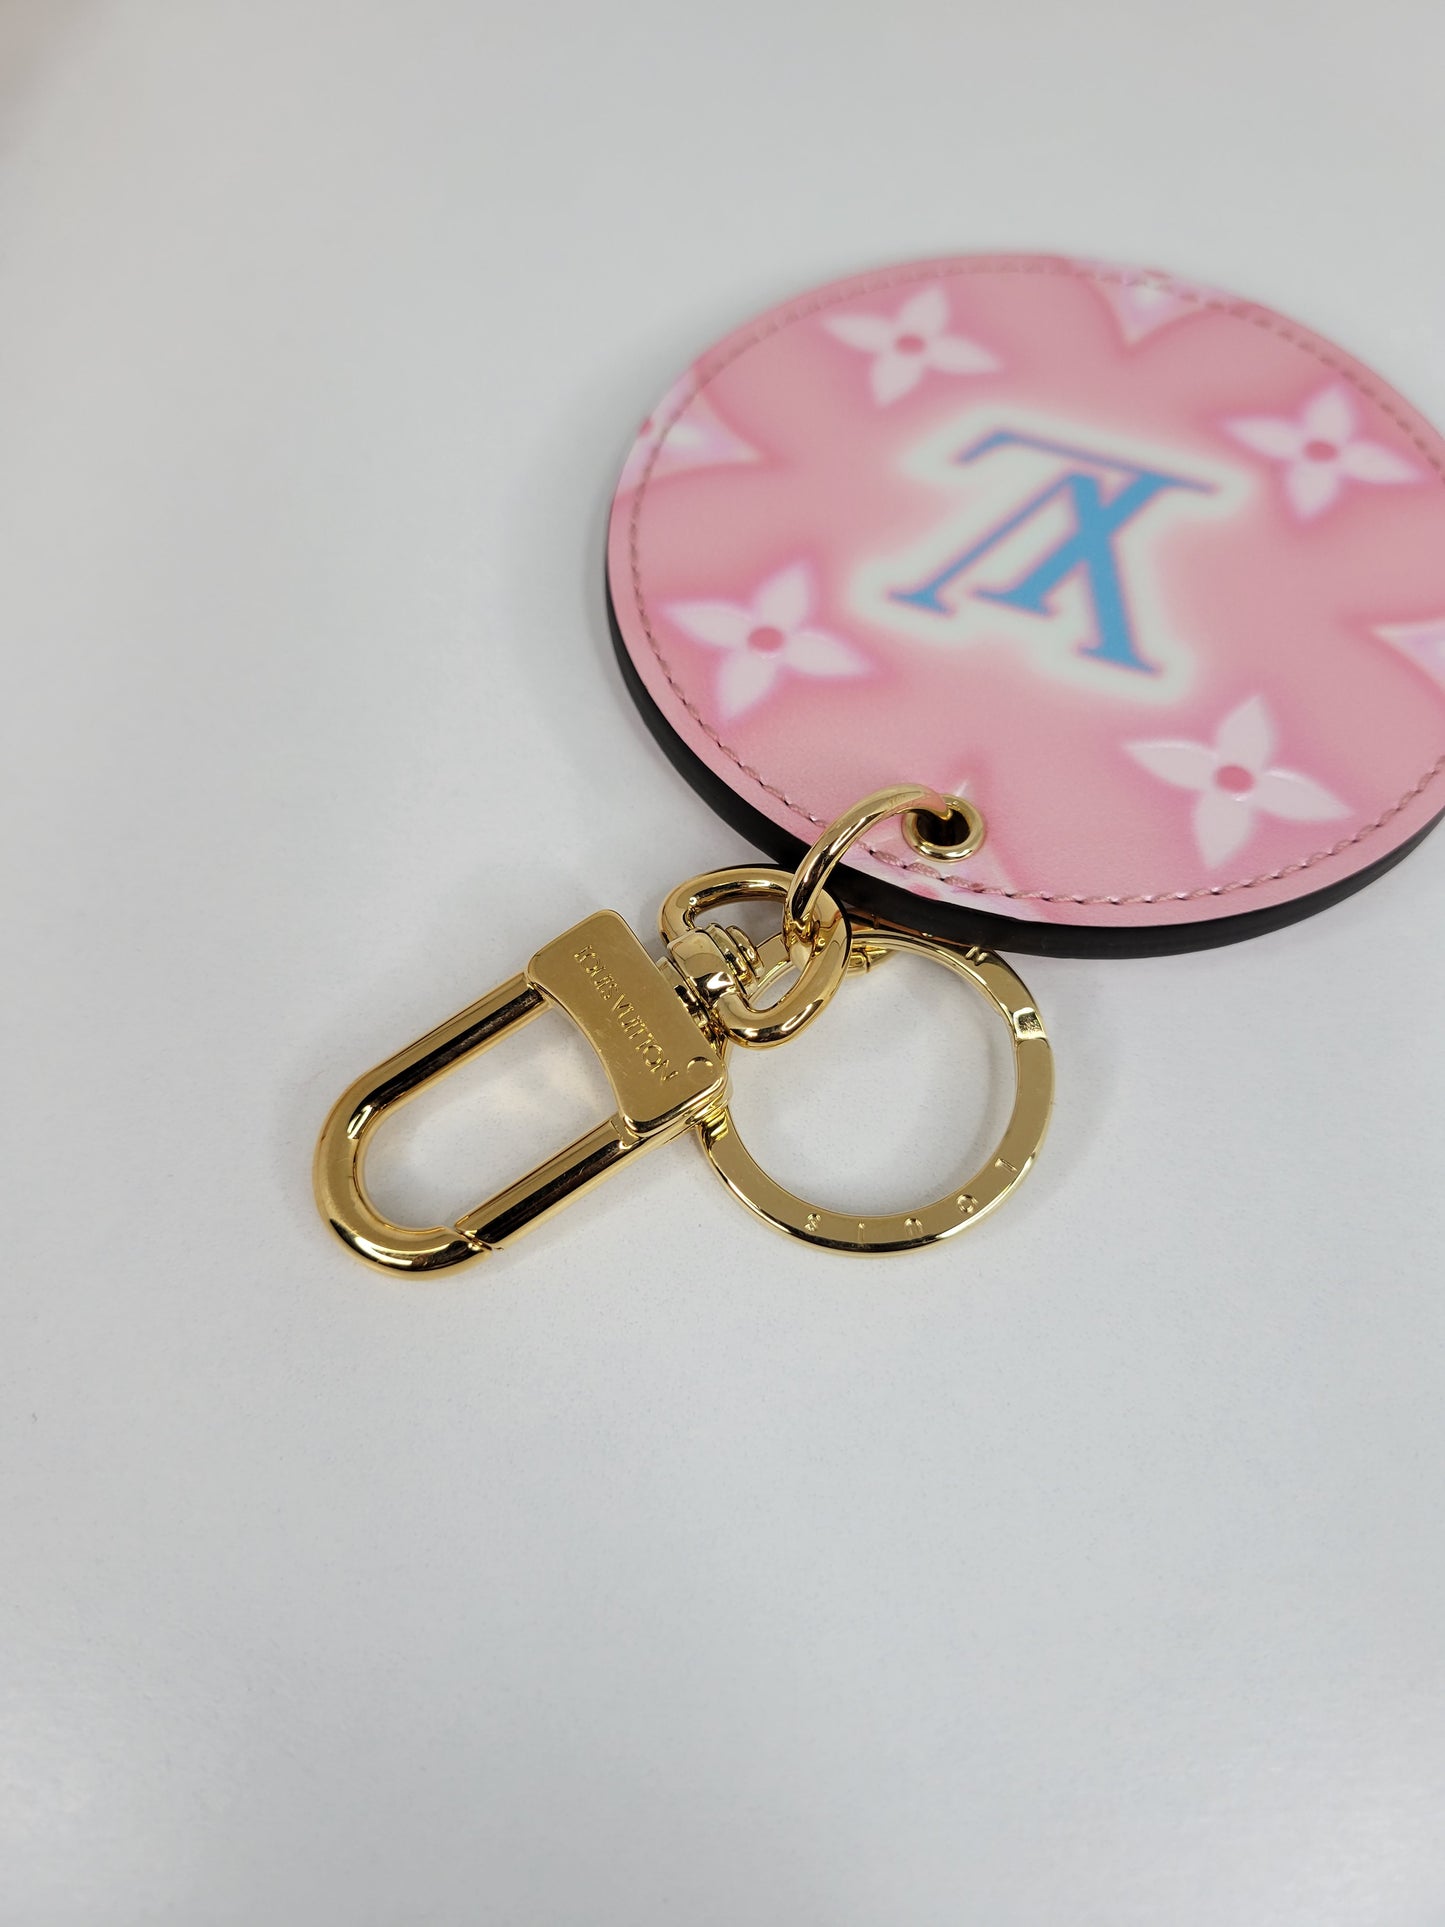 Louis Vuitton Valentines Day Bag Charm and Key Holder